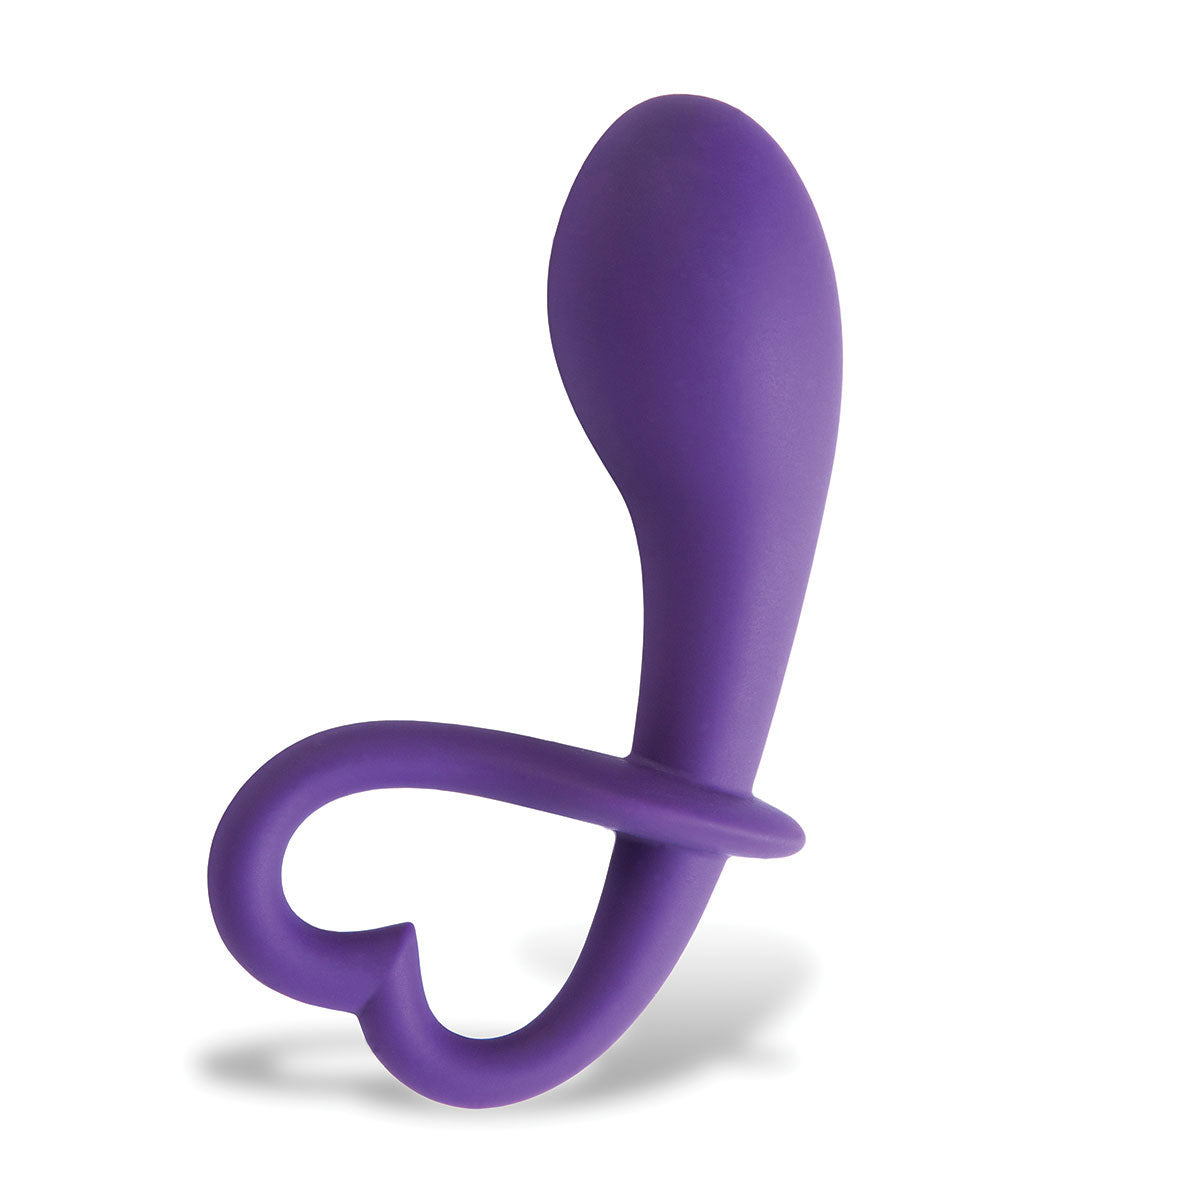 LoveLife Dare Curved Silicone Butt Plug by OhMiBod